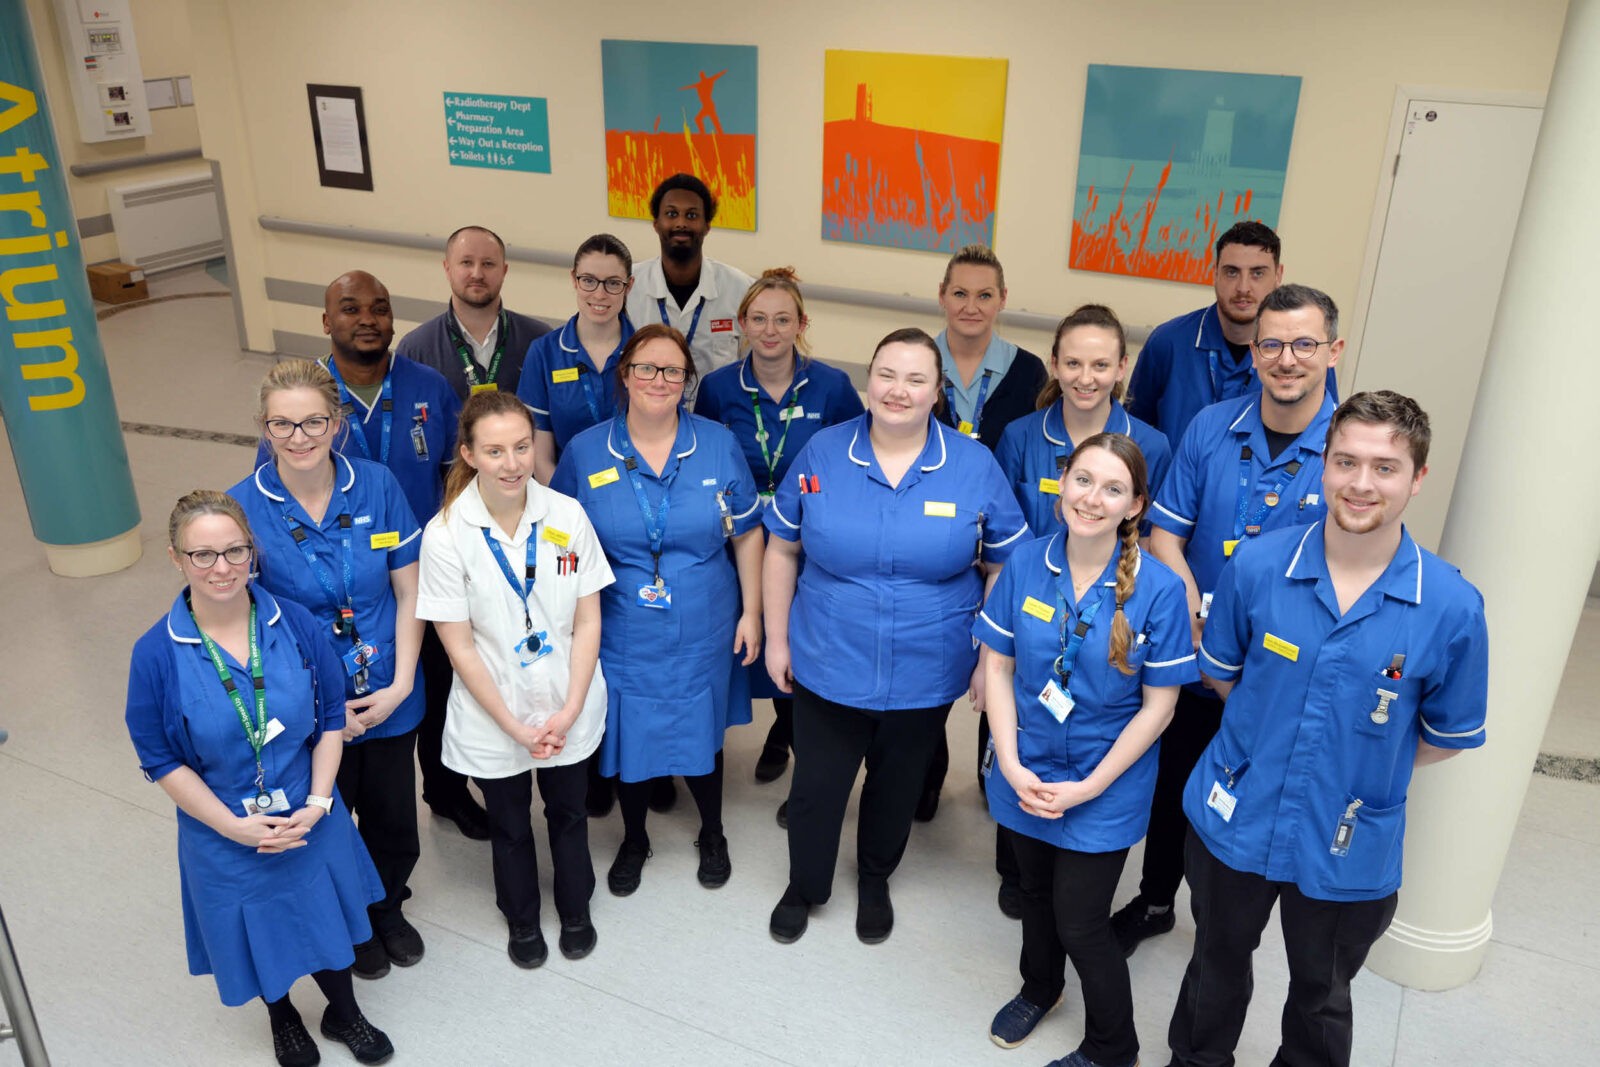 Top marks for Somersets radiotherapy services in patient survey